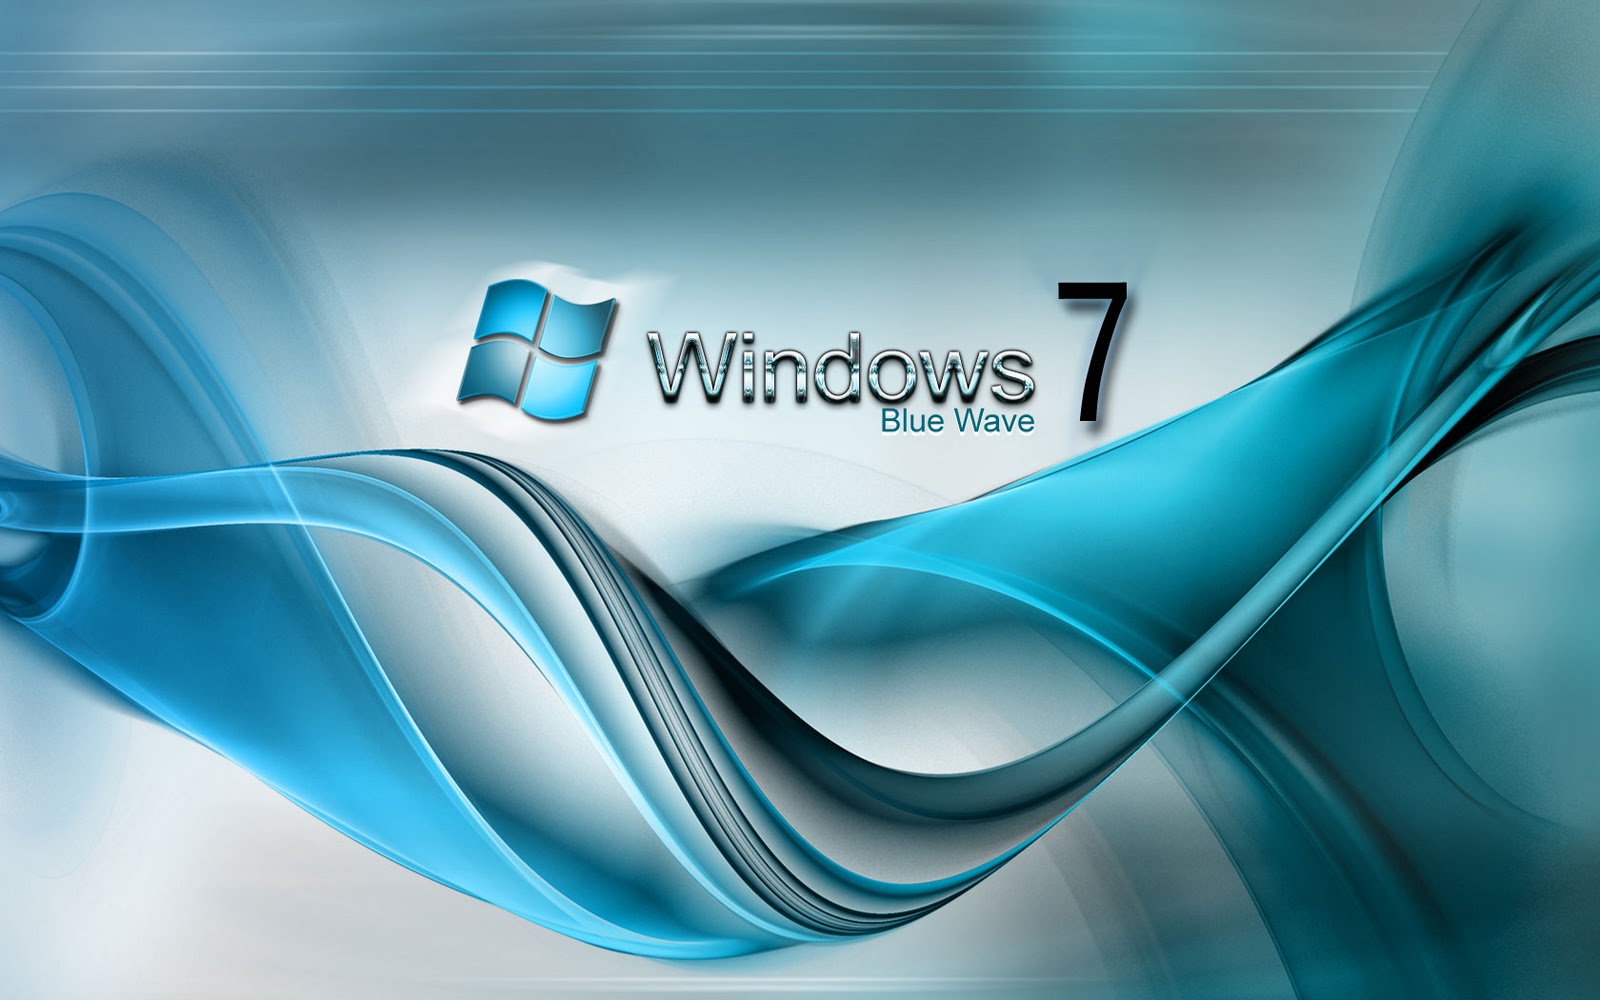 3d wallpaper for windows 7 hd free download